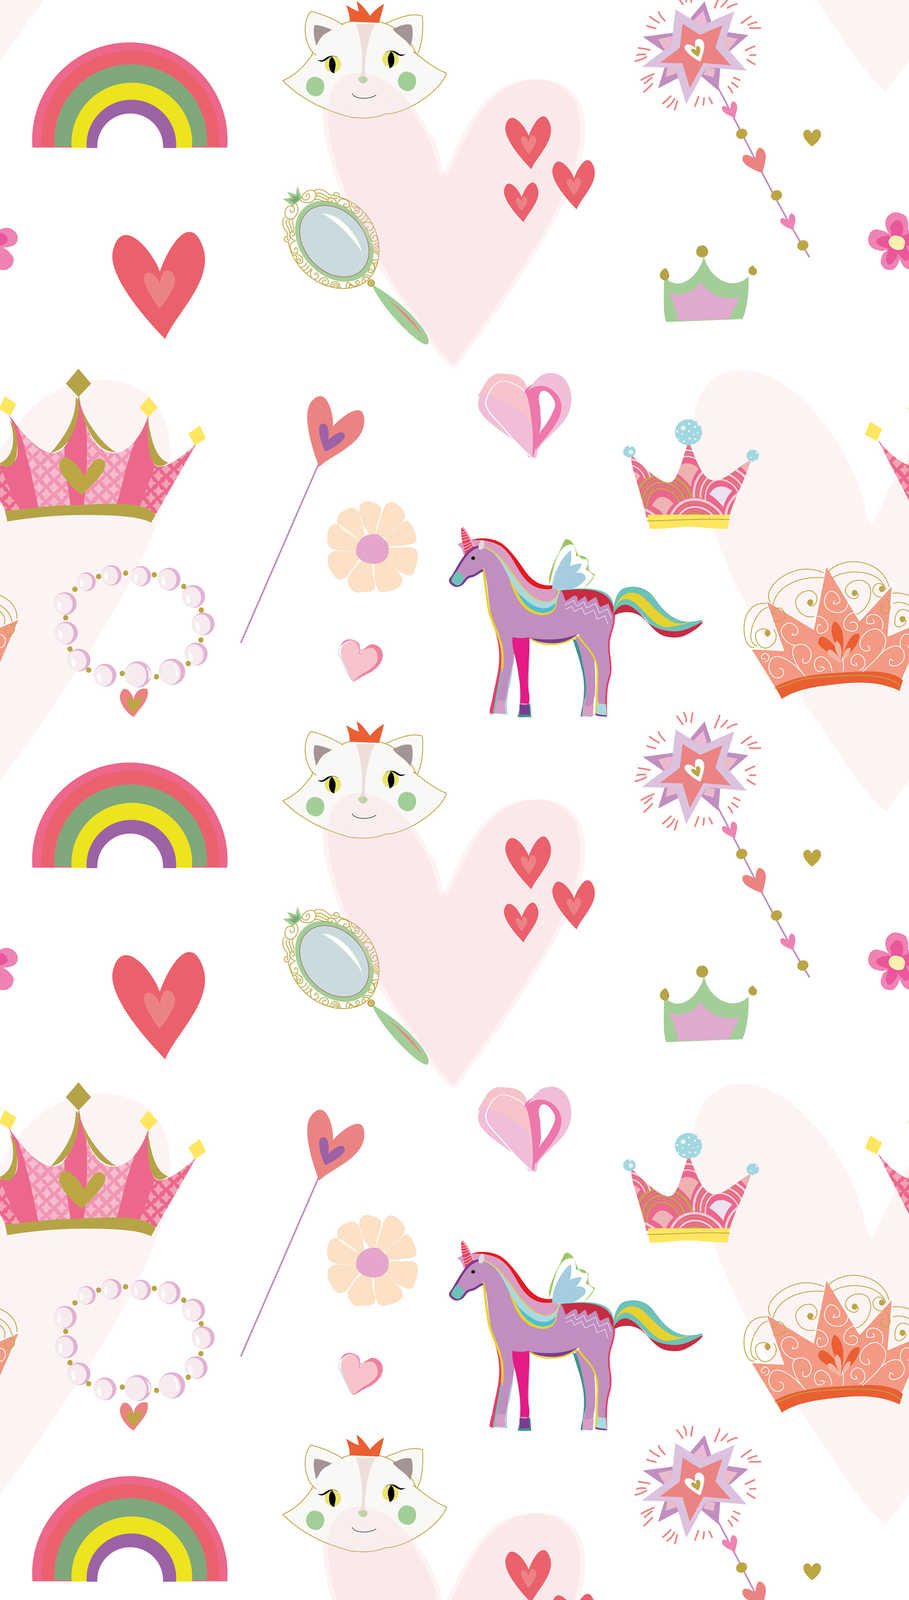             Children's wallpaper in princess style with hearts and animals - colourful, pink, white
        